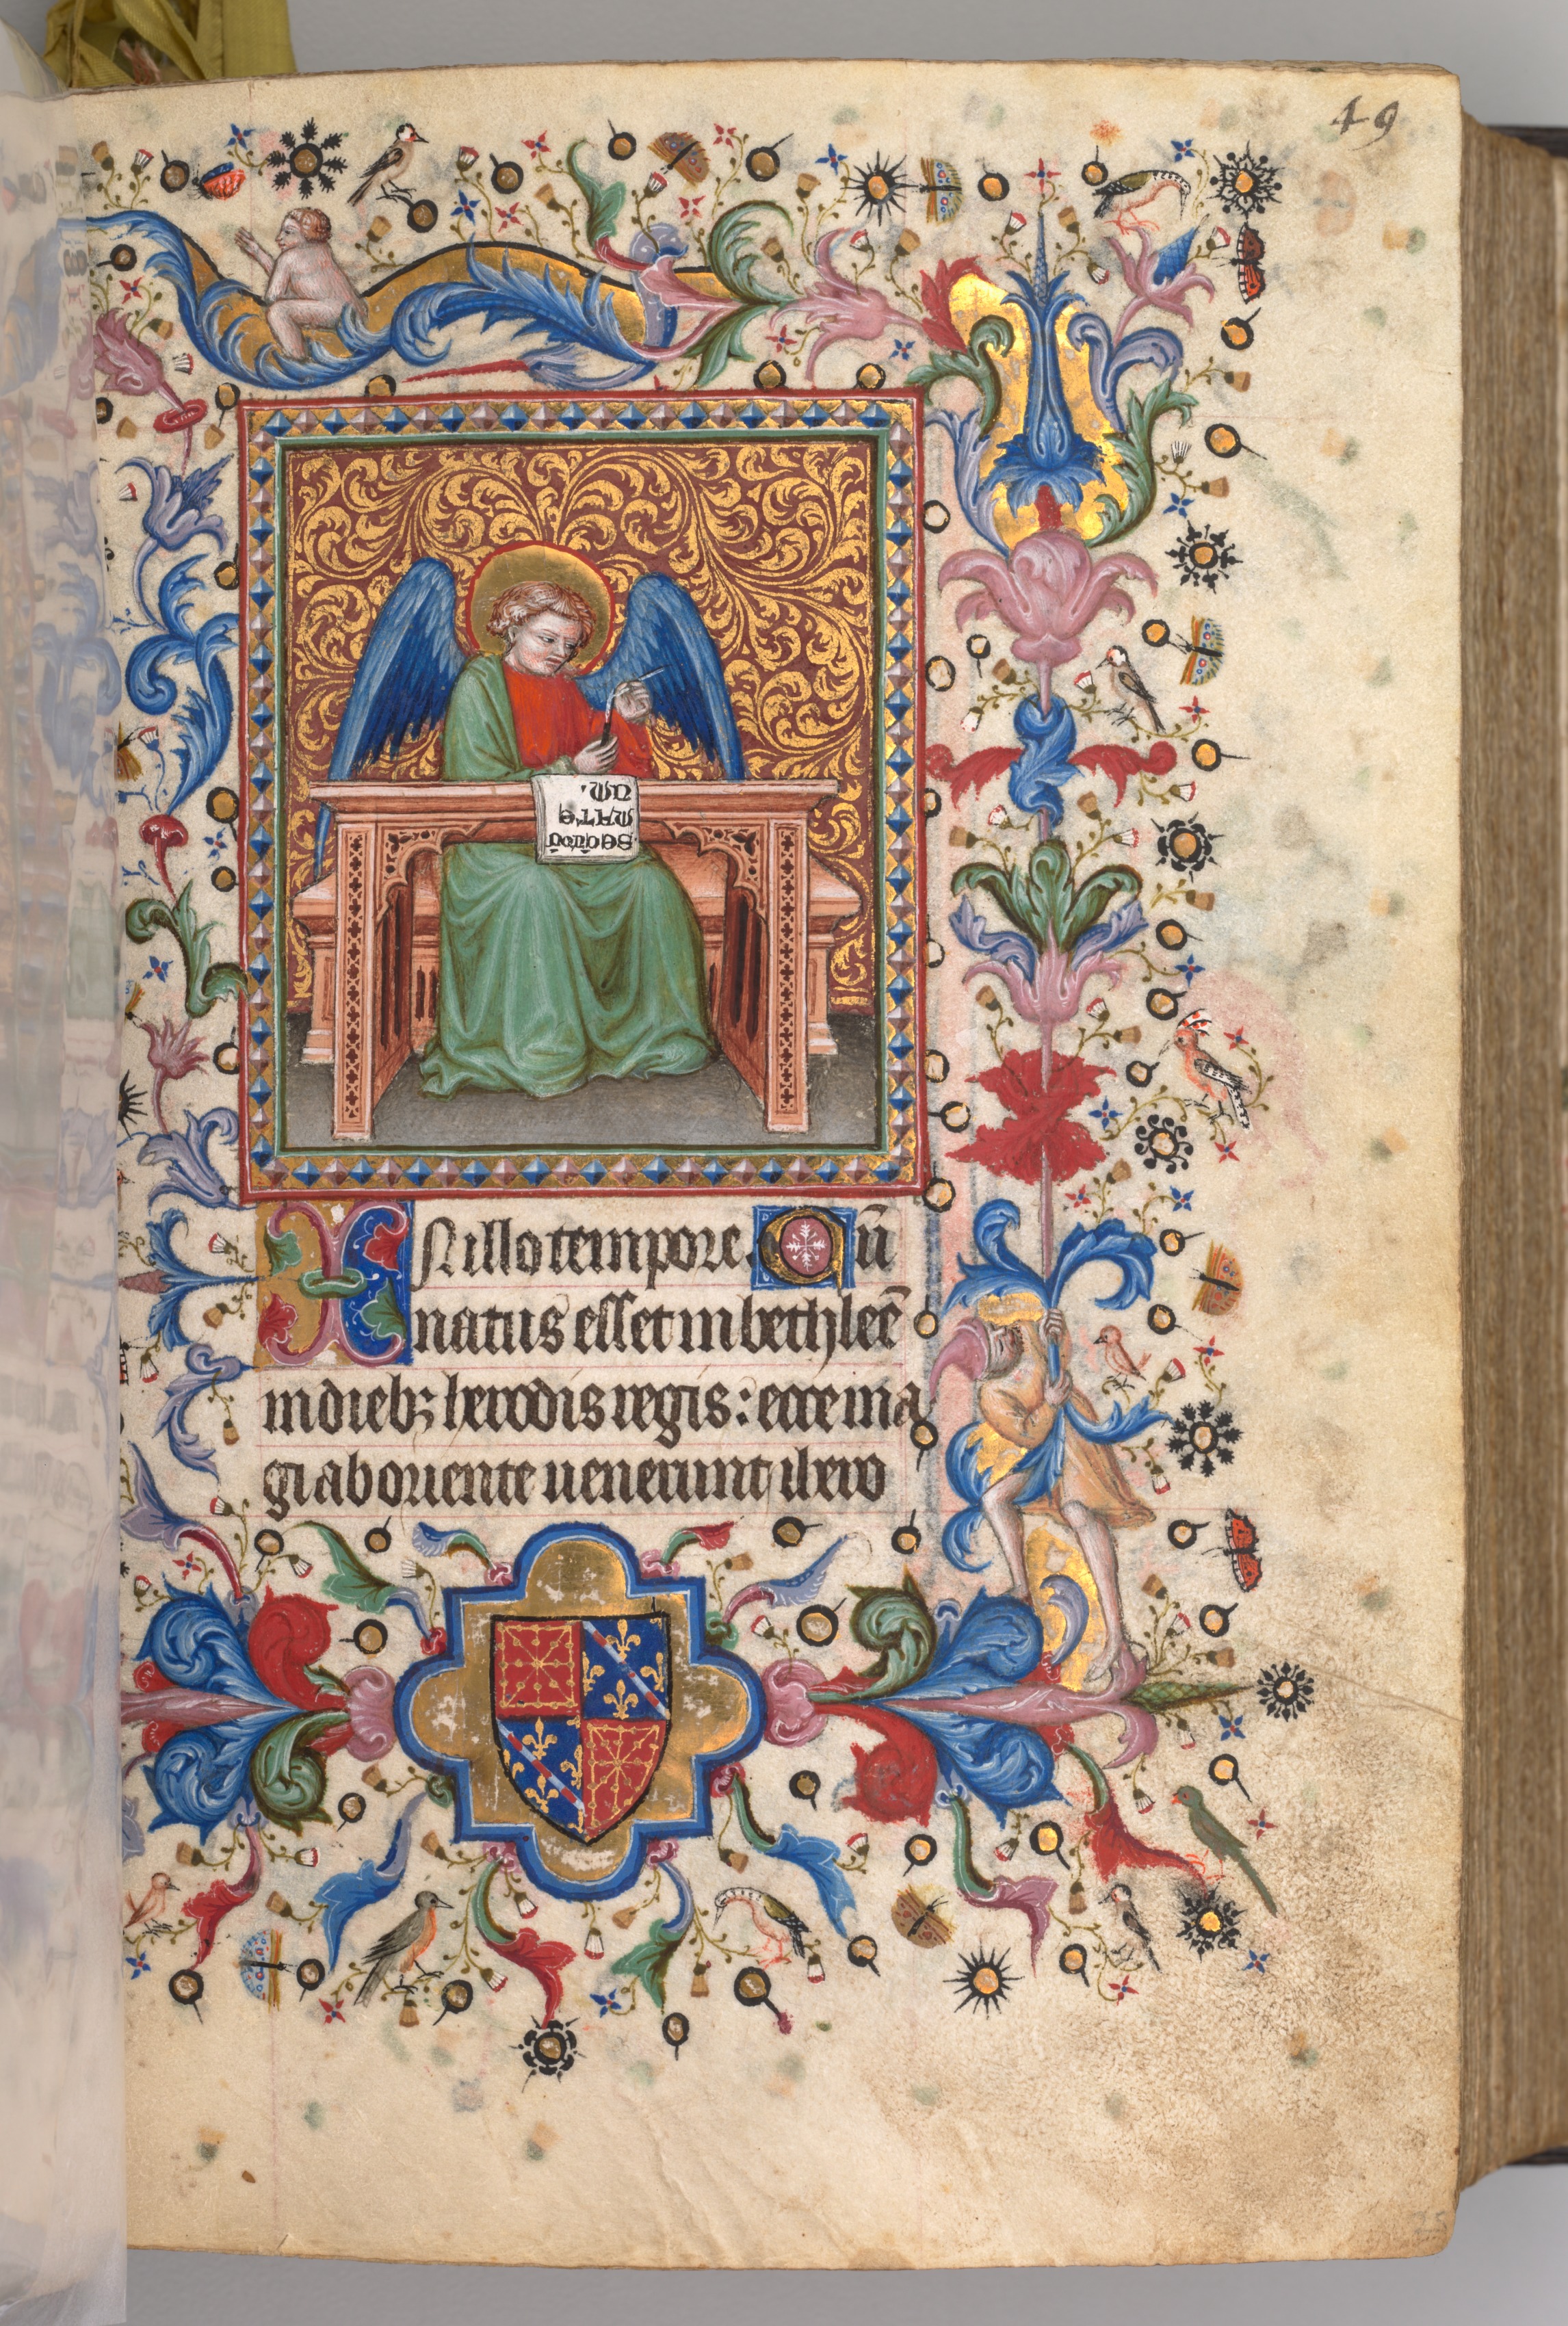 Hours of Charles the Noble, King of Navarre (1361-1425): fol. 25a, St. Matthew